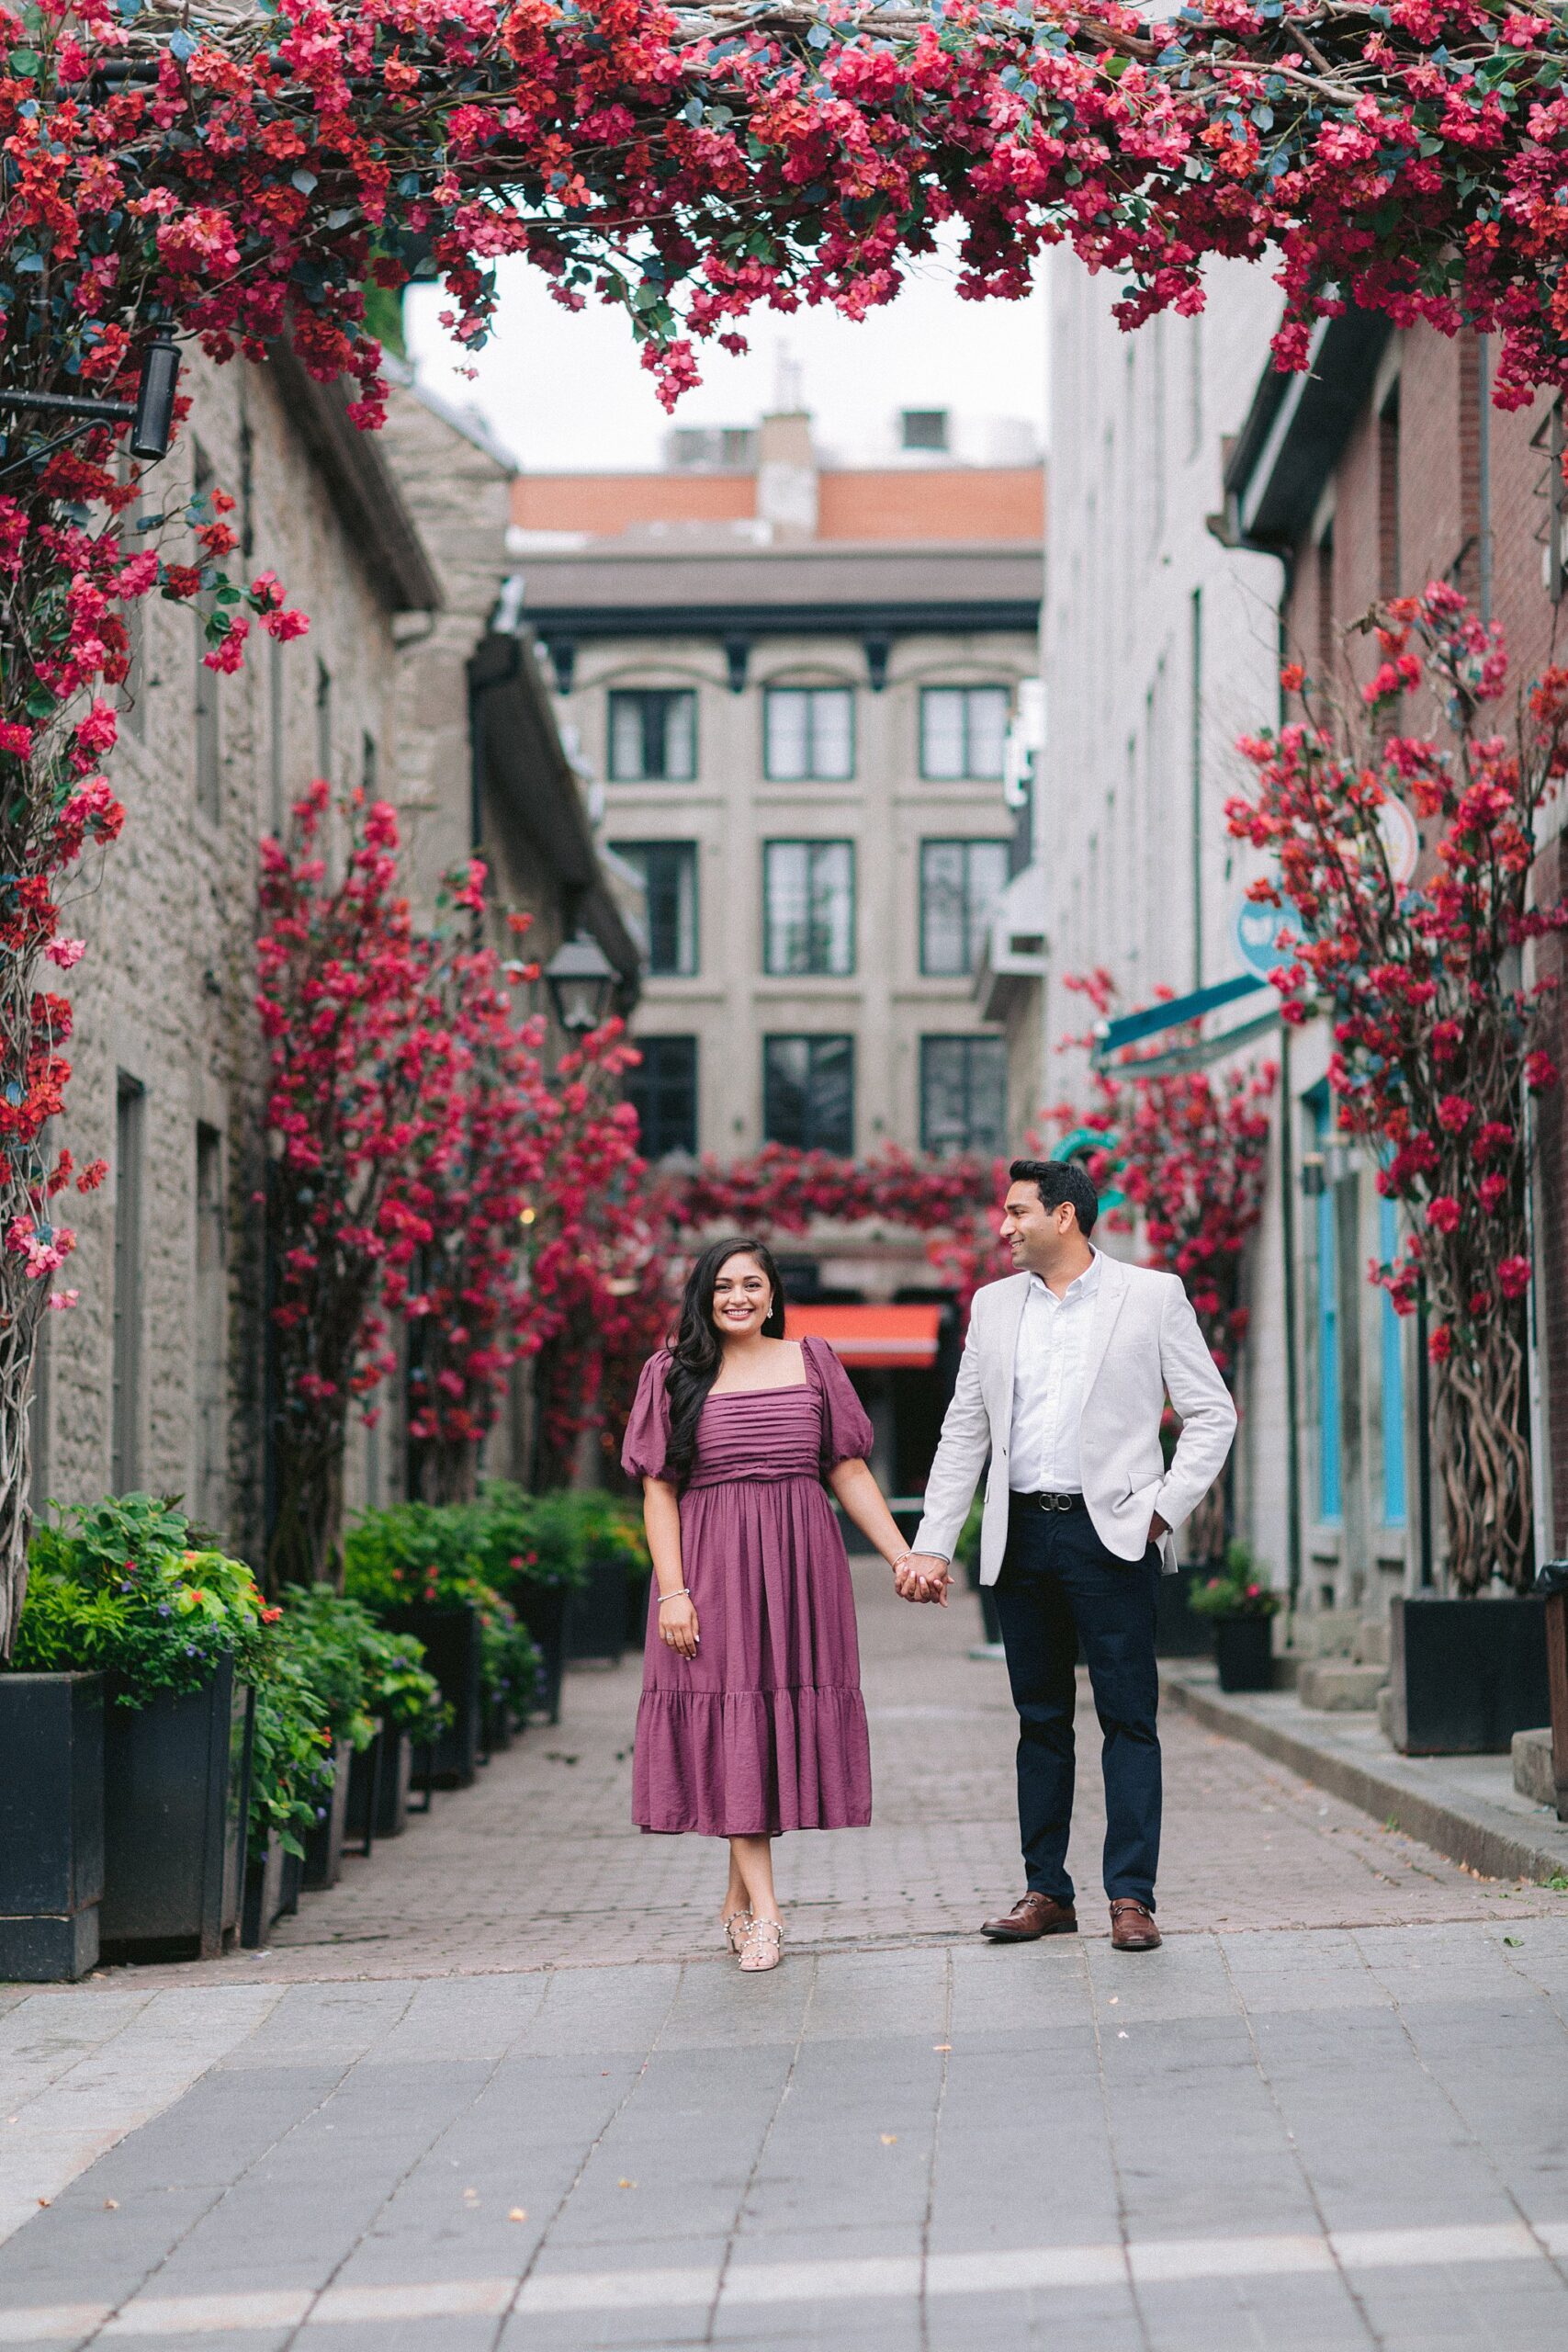 Montreal's enchanting ambiance adds charm to their engagement